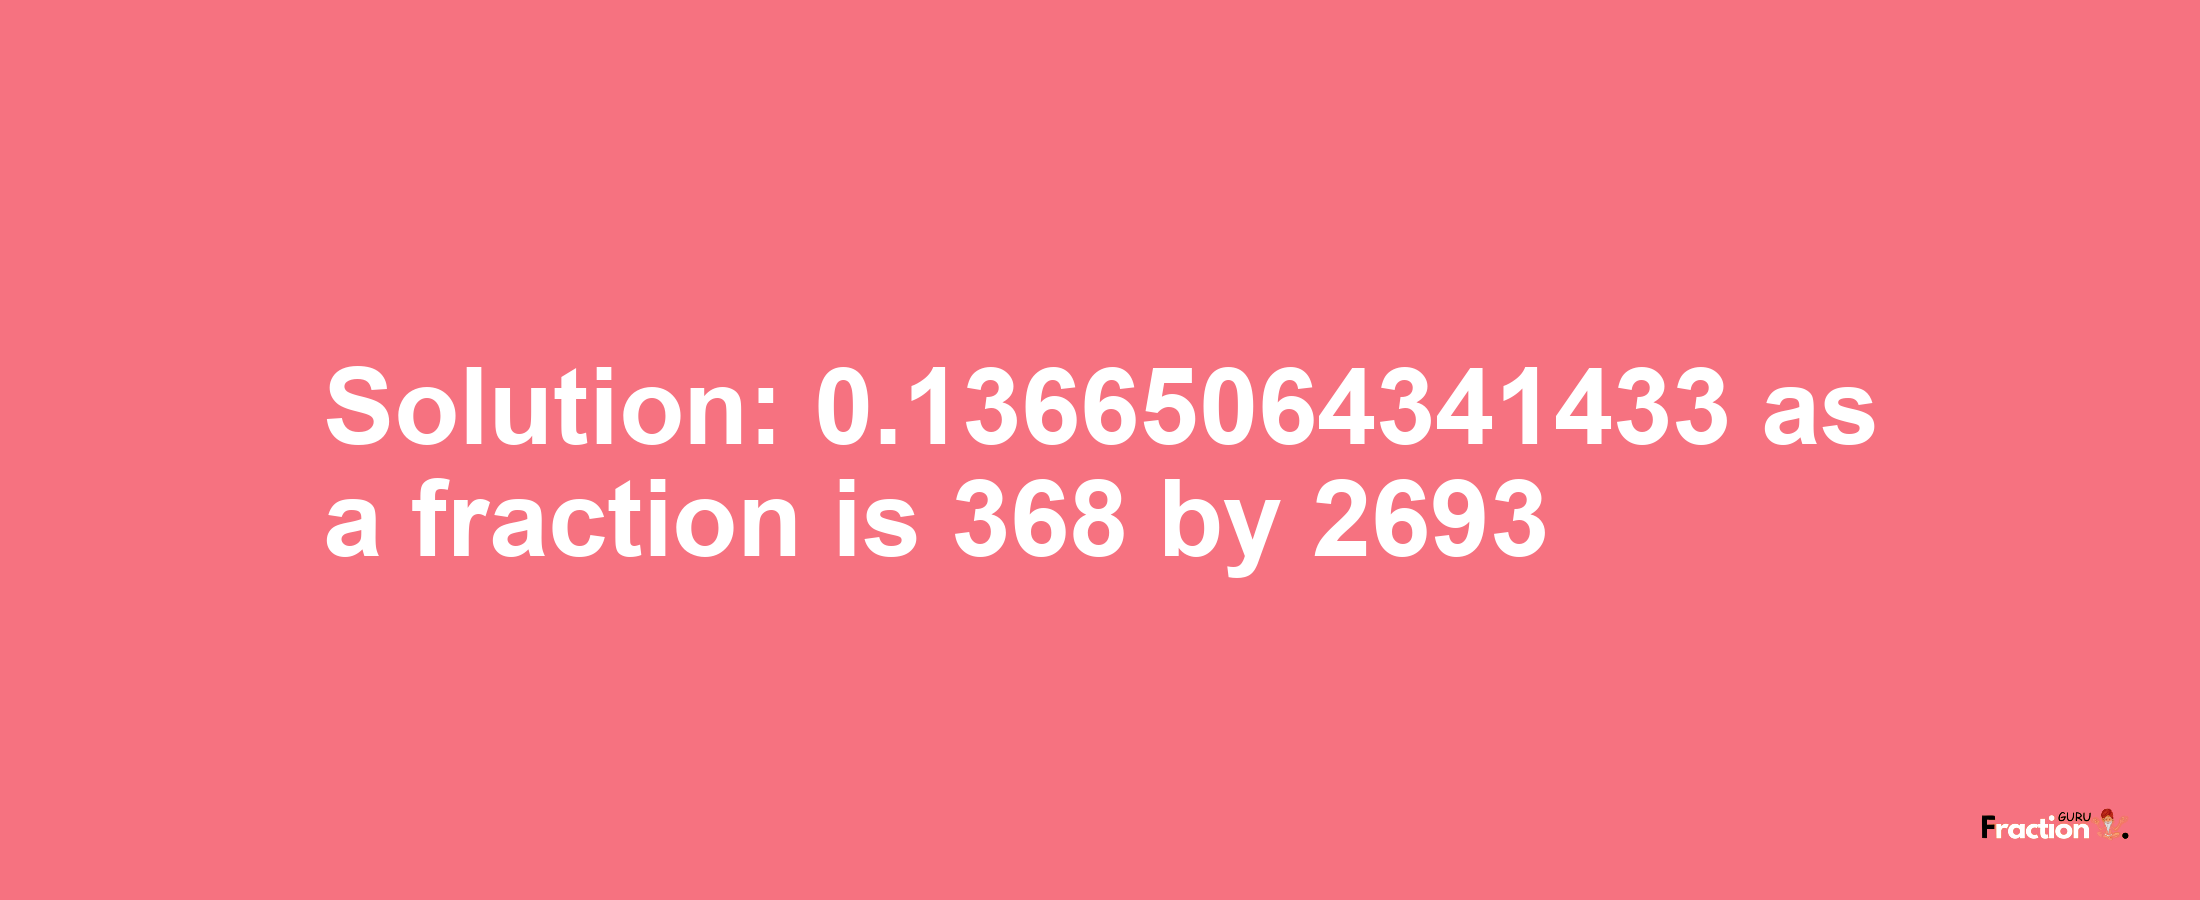 Solution:0.13665064341433 as a fraction is 368/2693